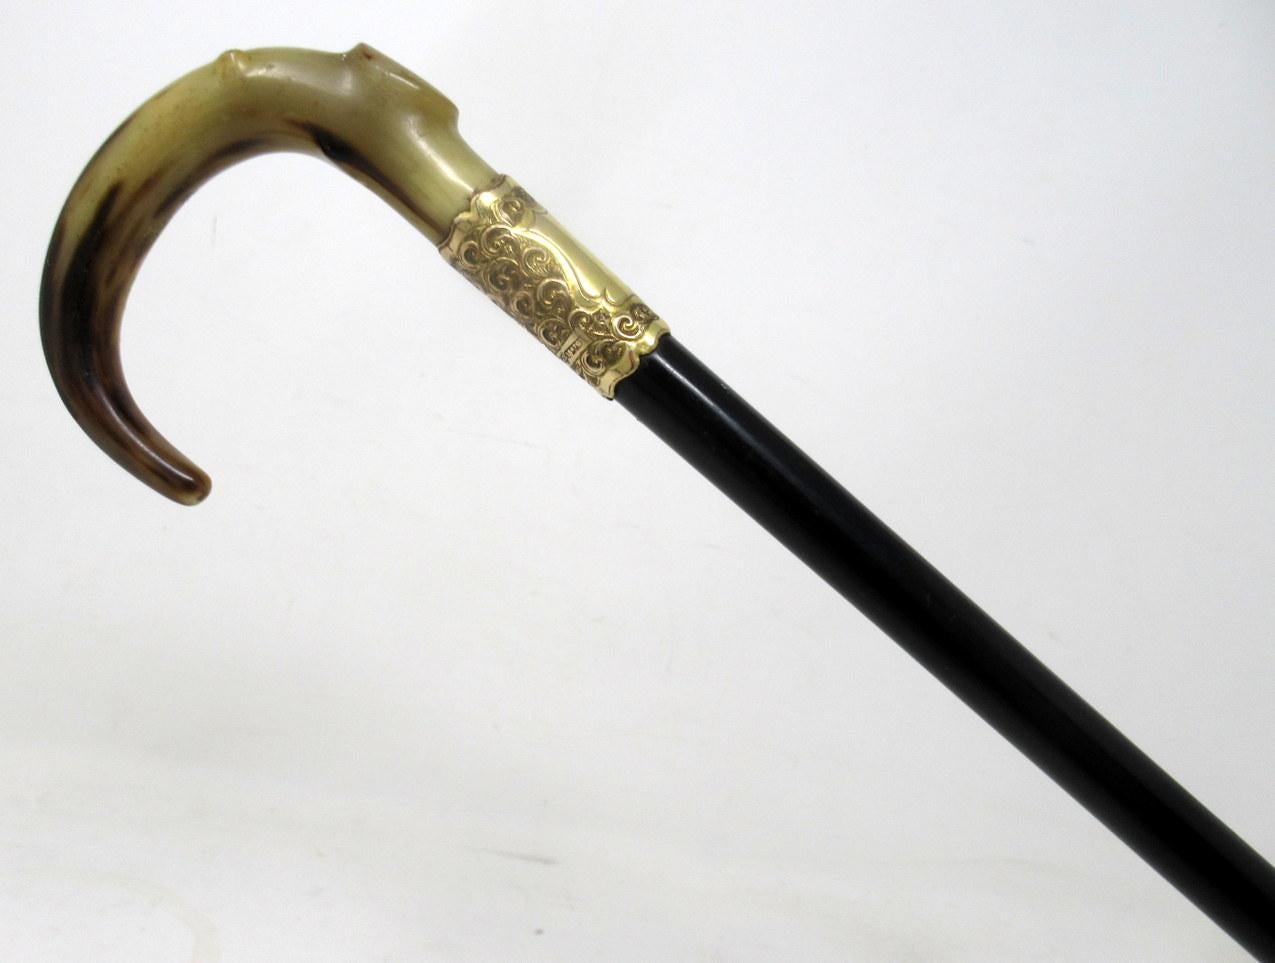 Very stylish fine quality lady’s or gentleman’s ebonised wooden walking cane with an elegant decoratively carved classical Cow Horn Crook handle above a finely chased gold plated collar with a central vacant cartouche. First quarter of the Twentieth